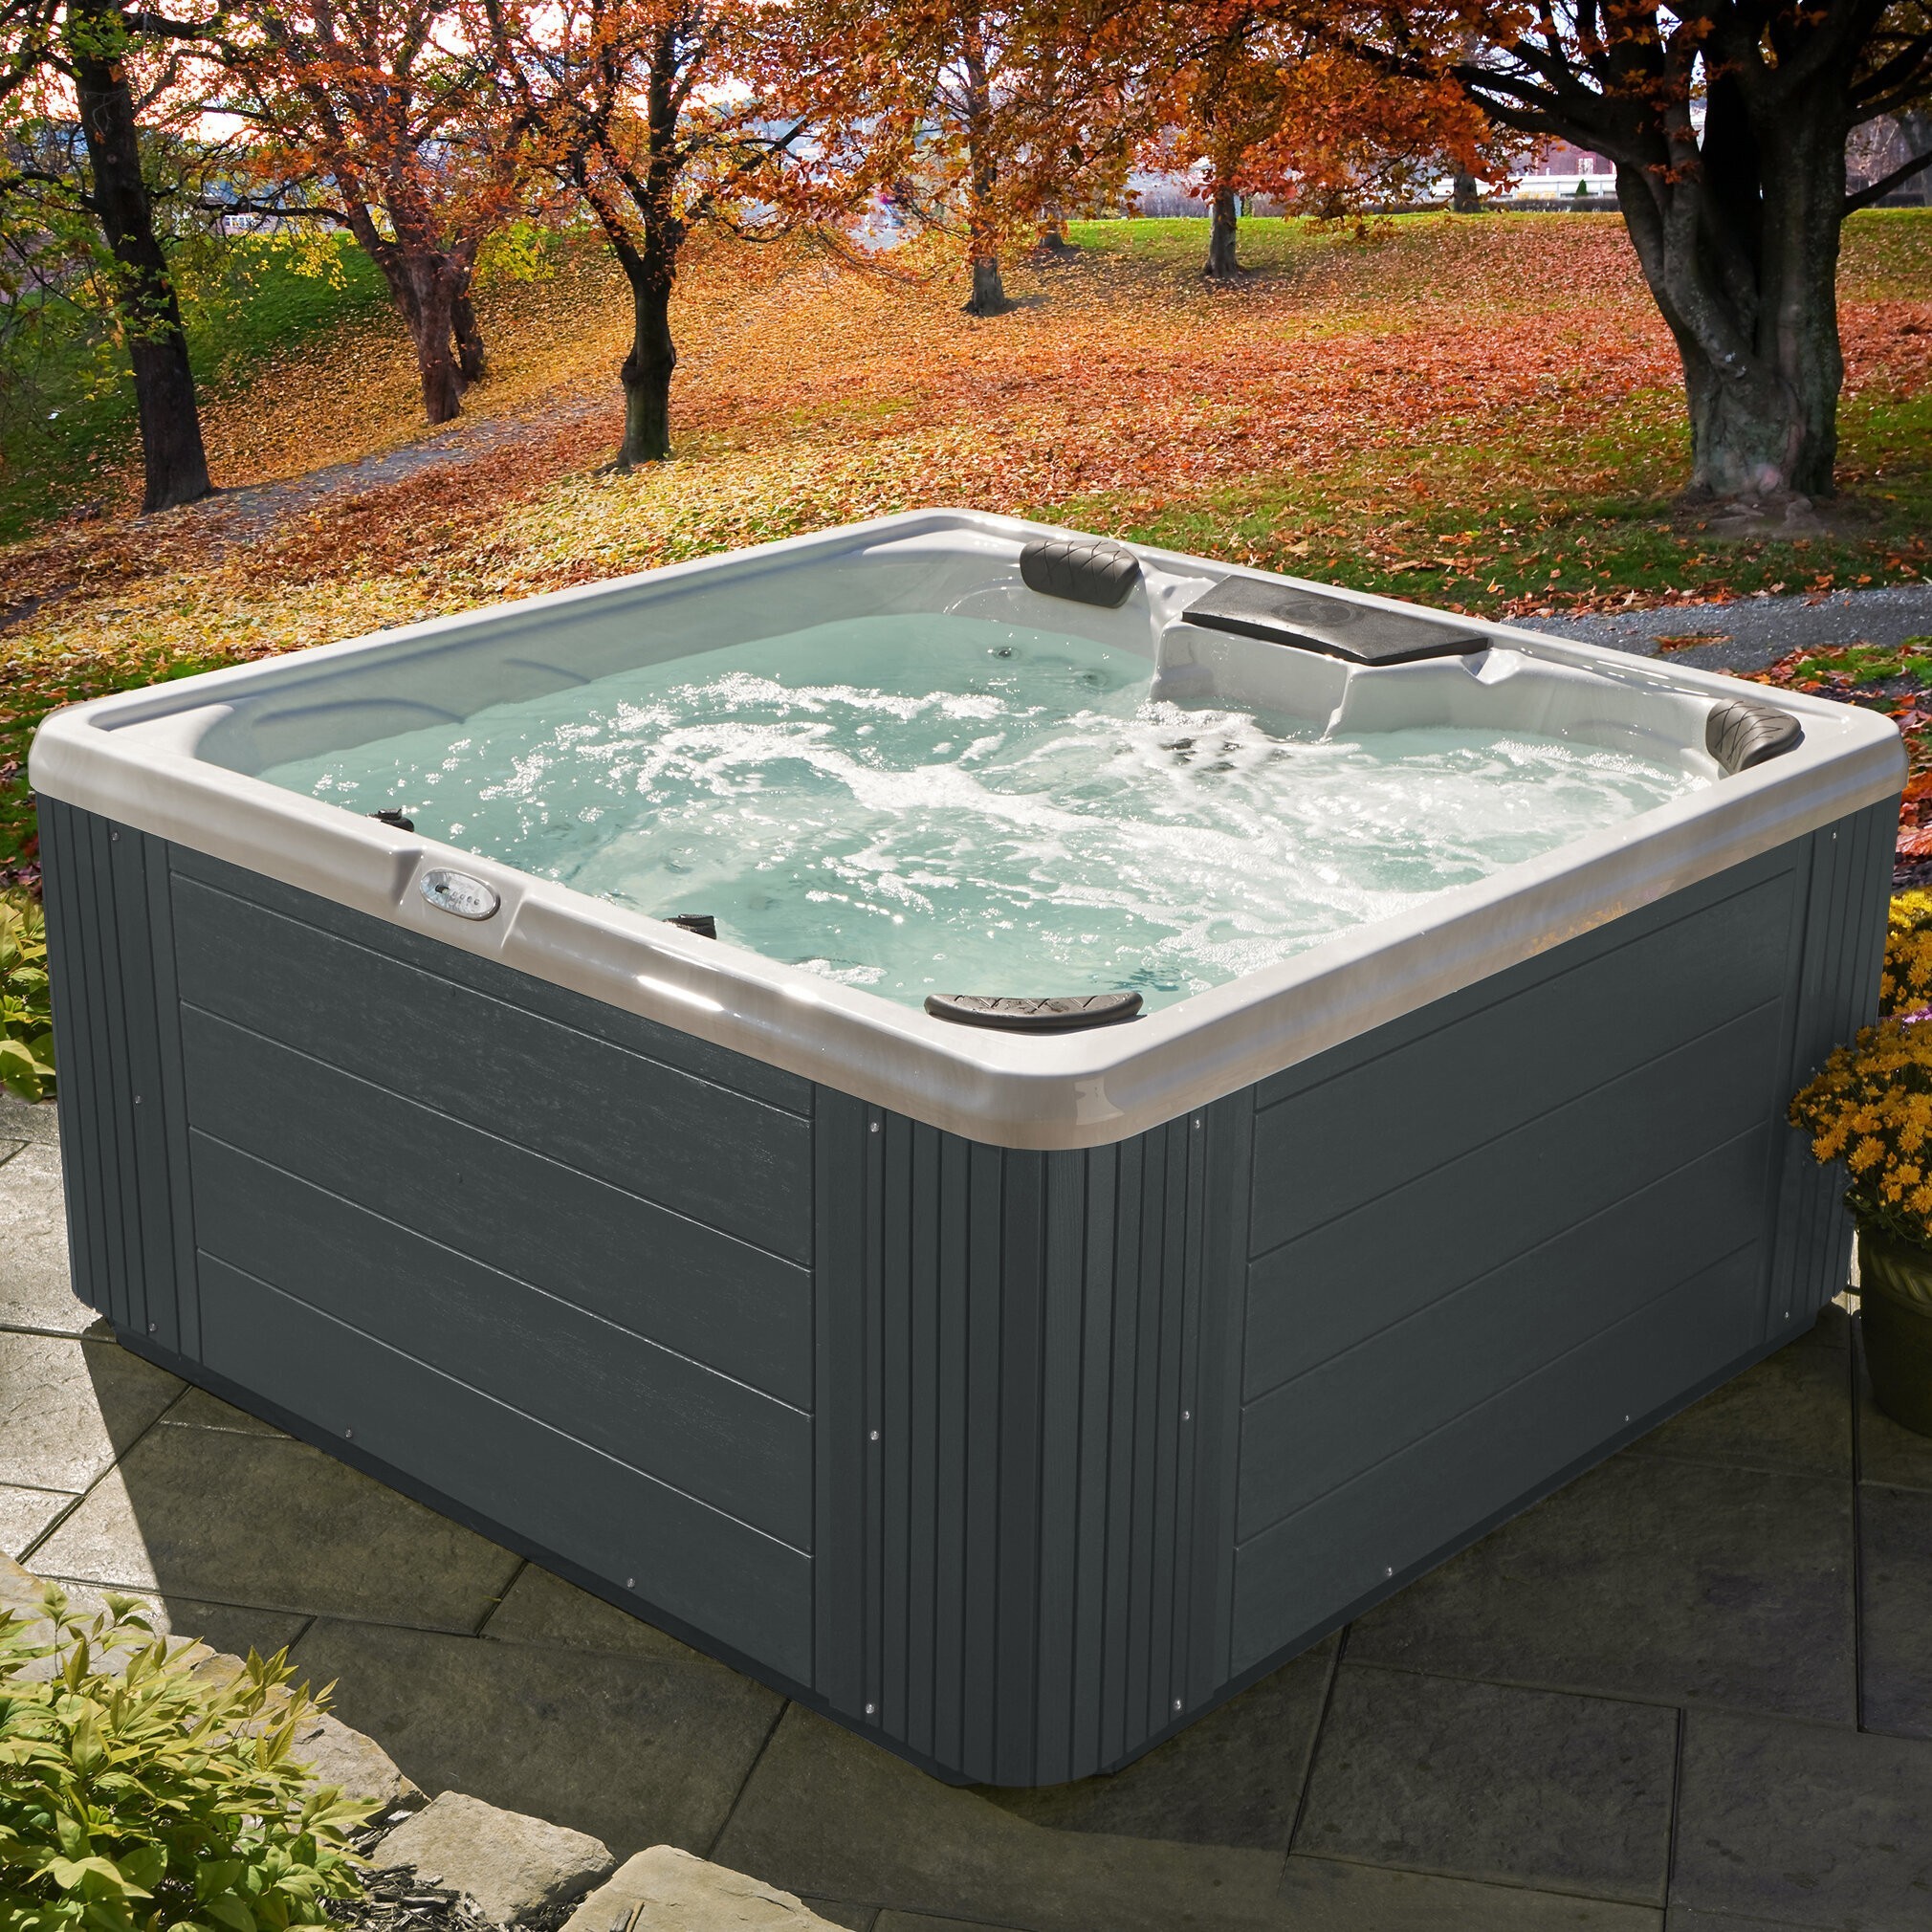 How to Choose a Hot Tub - Foter